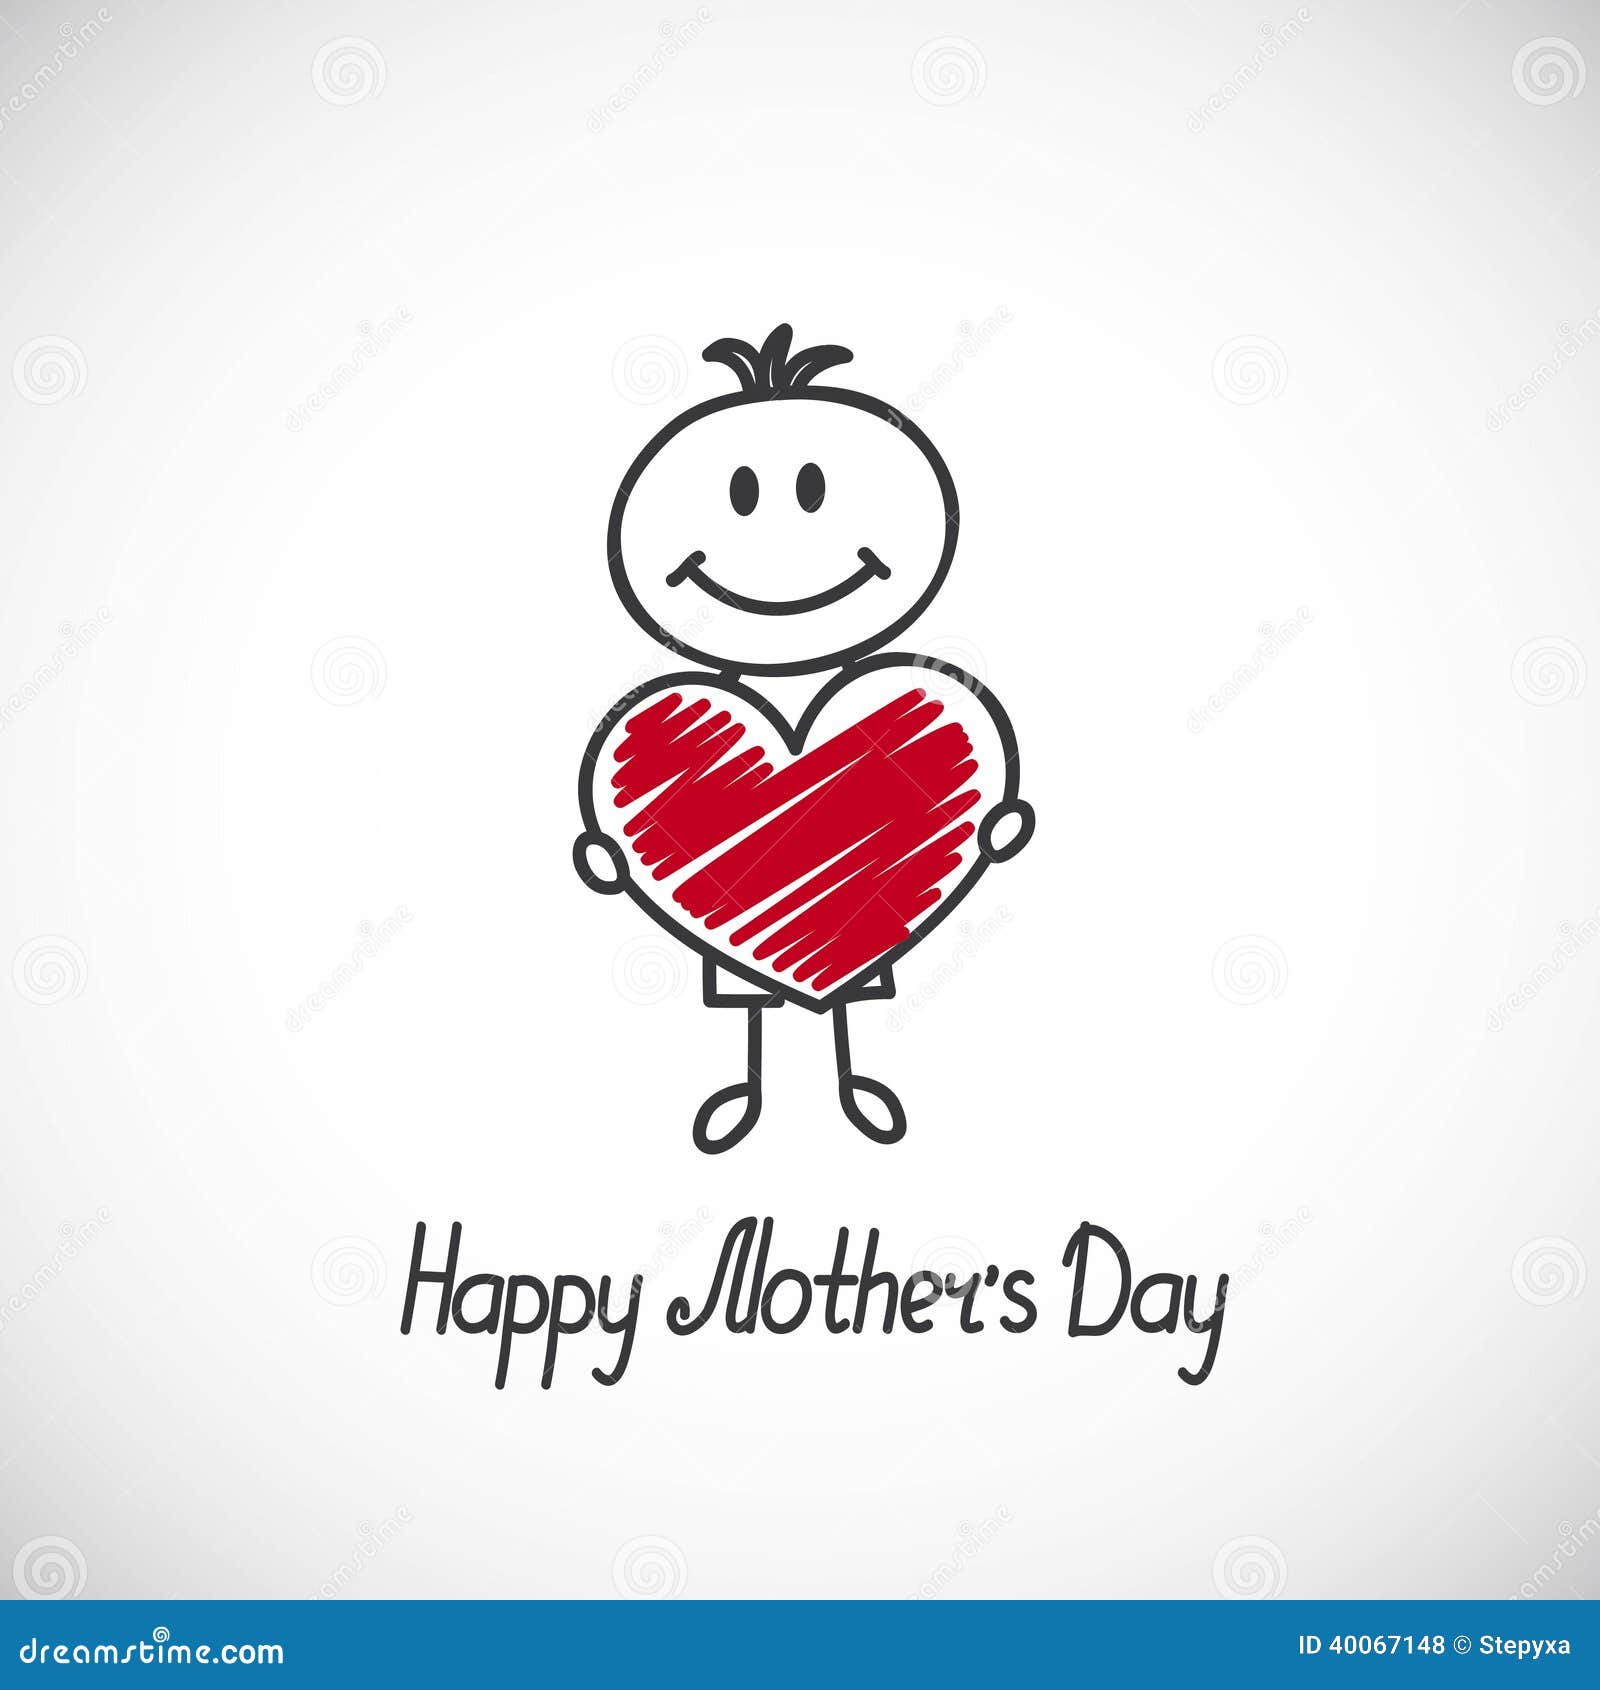 Happy mothers day card stock vector. Illustration of affectionate - 40067148